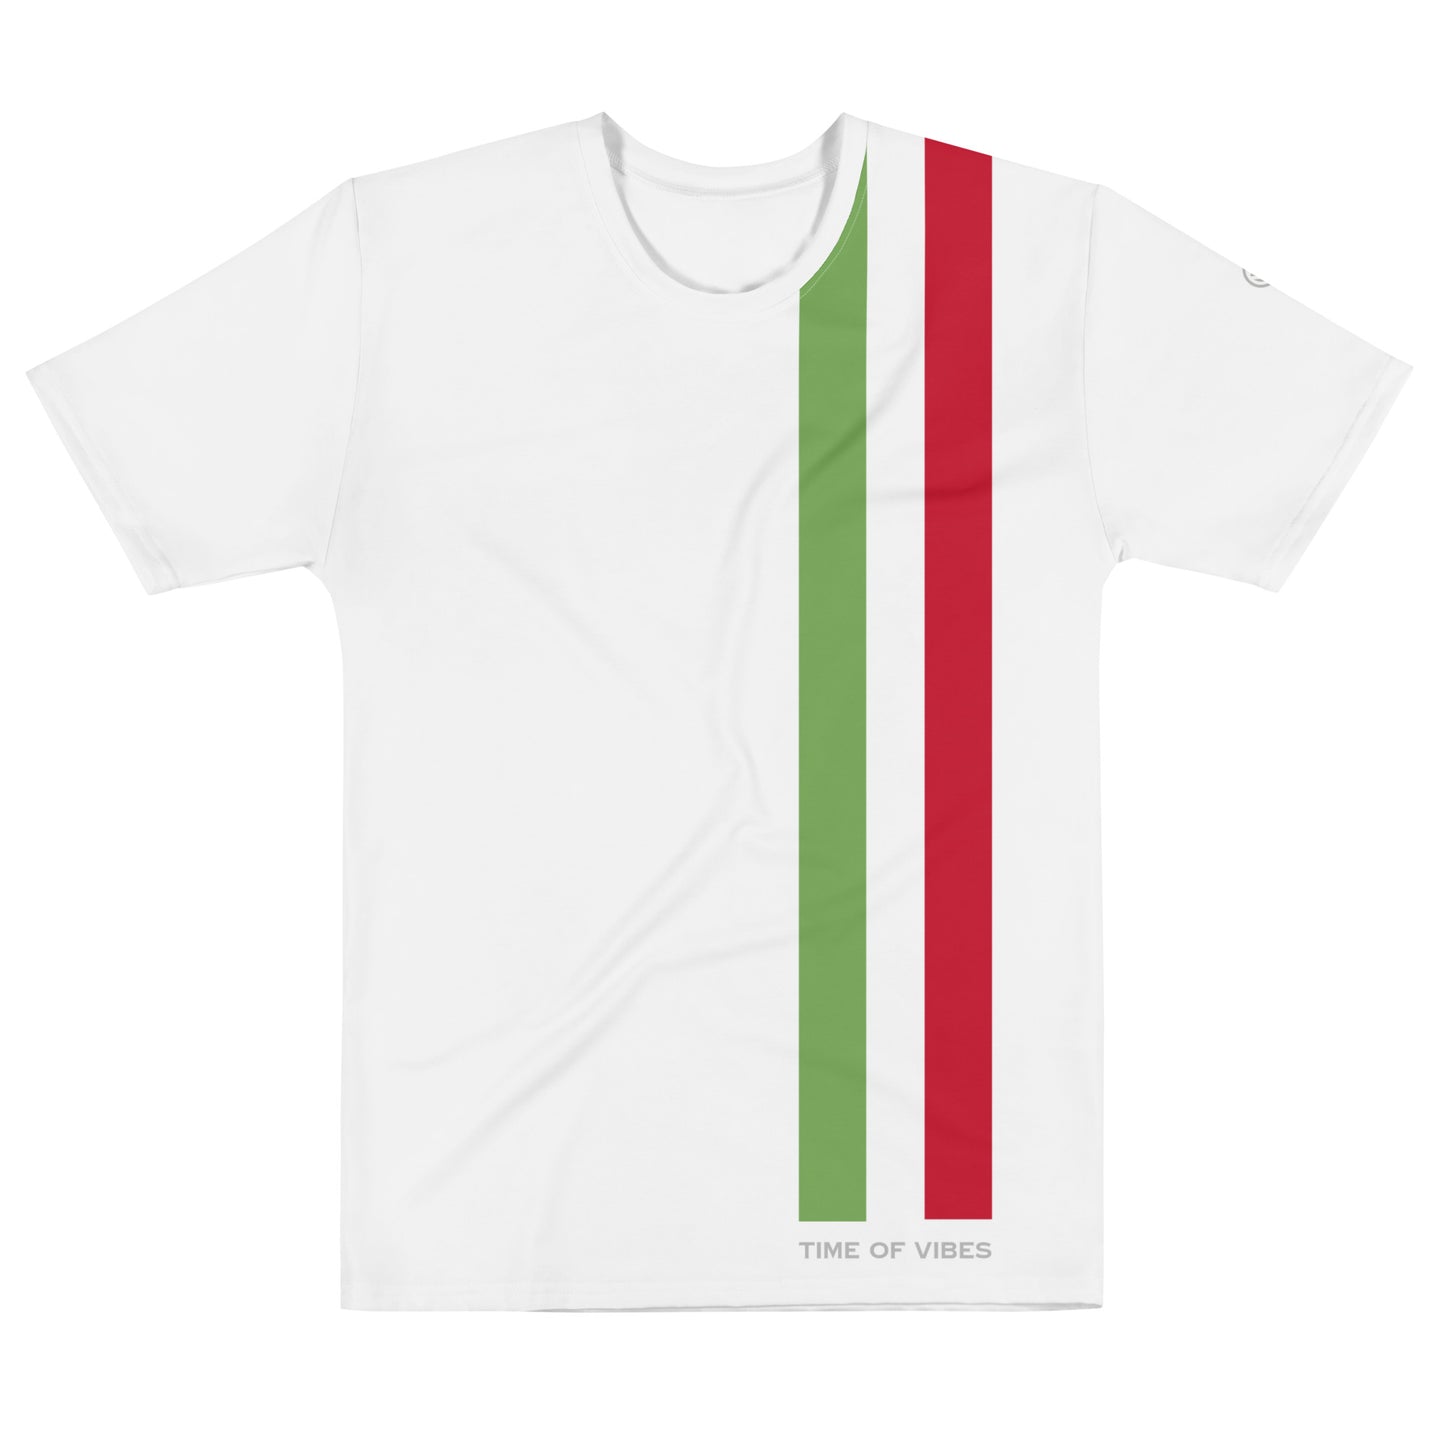 TIME OF VIBES - Premium Men's t-shirt ITALY - €49.00